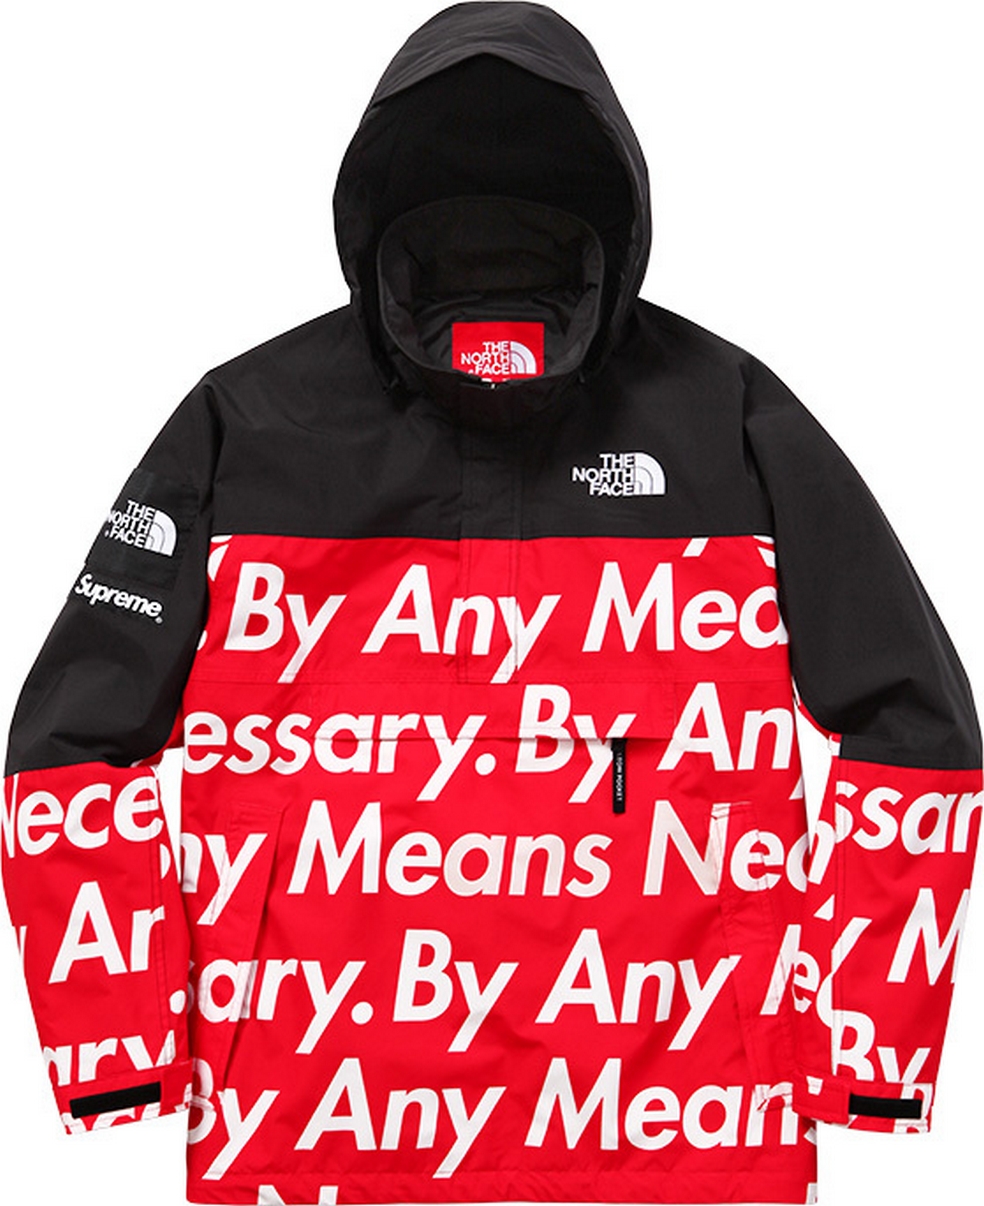 The Source |Supreme x The North Face 